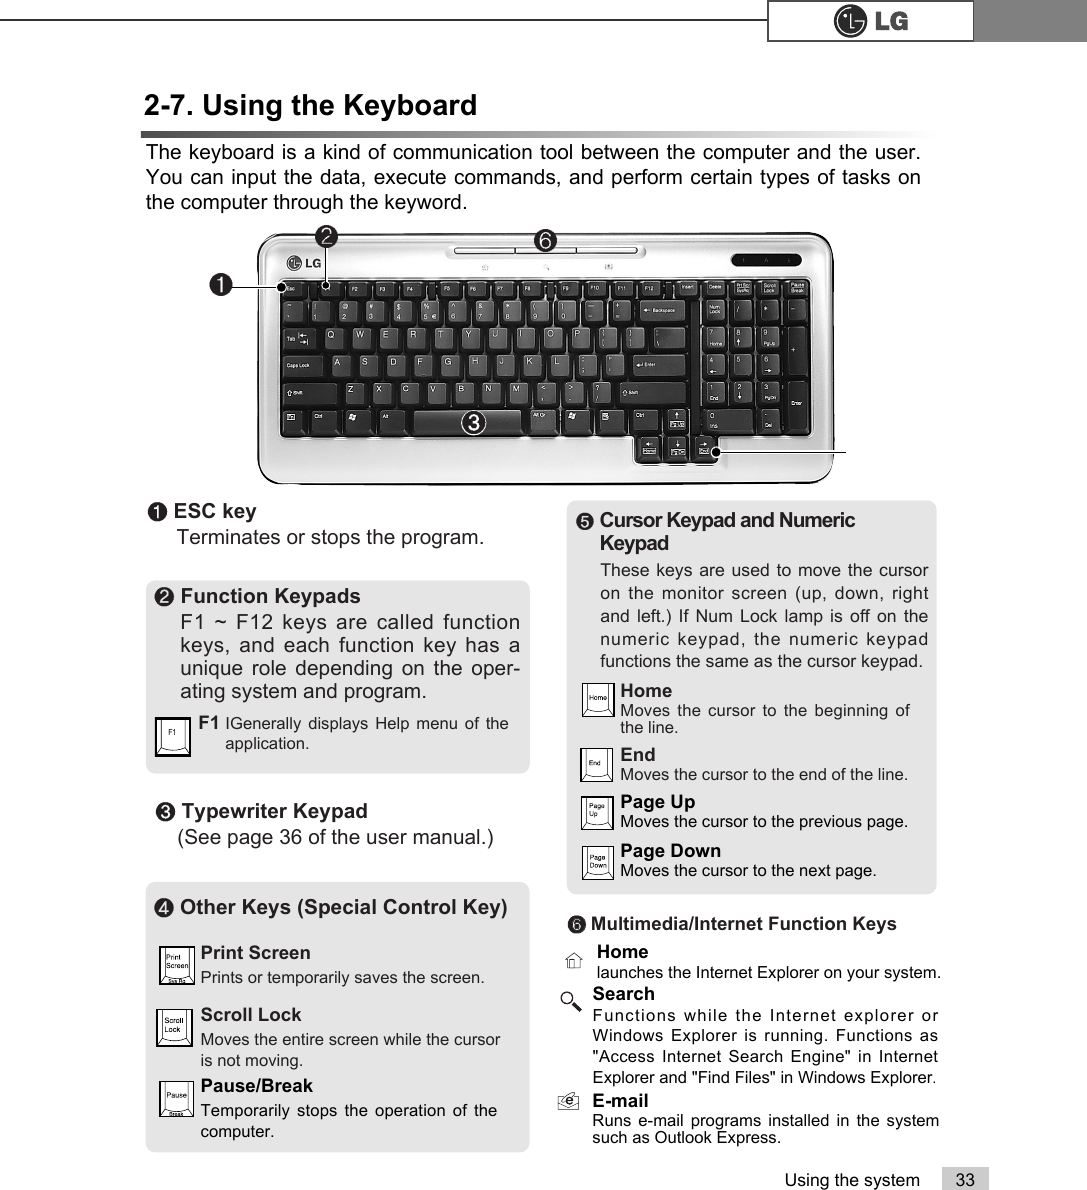 33Using the system2-7. Using the KeyboardThe keyboard is a kind of communication tool between the computer and the user.You can input the data, execute commands, and perform certain types of tasks onthe computer through the keyword.ℚTypewriter Keypad(See page 36 of the user manual.) ℘ESC keyTerminates or stops the program.ℛOther Keys (Special Control Key)Scroll LockMoves the entire screen while the cursoris not moving.Print ScreenPrints or temporarily saves the screen.Pause/BreakTemporarily stops the operation of thecomputer.ℙFunction KeypadsF1 ~ F12 keys are called functionkeys, and each function key has aunique role depending on the oper-ating system and program.F1 IGenerally displays Help menu of theapplication.F1℘ℙℝℚℝℝMultimedia/Internet Function KeysℜCursor Keypad and NumericKeypadThese keys are used to move the cursoron the monitor screen (up, down, rightand left.) If Num Lock lamp is off on thenumeric keypad, the numeric keypadfunctions the same as the cursor keypad.EndMoves the cursor to the end of the line.HomeMoves the cursor to the beginning ofthe line.Page UpMoves the cursor to the previous page.Page DownMoves the cursor to the next page.Homelaunches the Internet Explorer on your system.SearchFunctions while the Internet explorer orWindows Explorer is running. Functions as&quot;Access Internet Search Engine&quot; in InternetExplorer and &quot;Find Files&quot; in Windows Explorer.E-mailRuns e-mail programs installed in the systemsuch as Outlook Express.